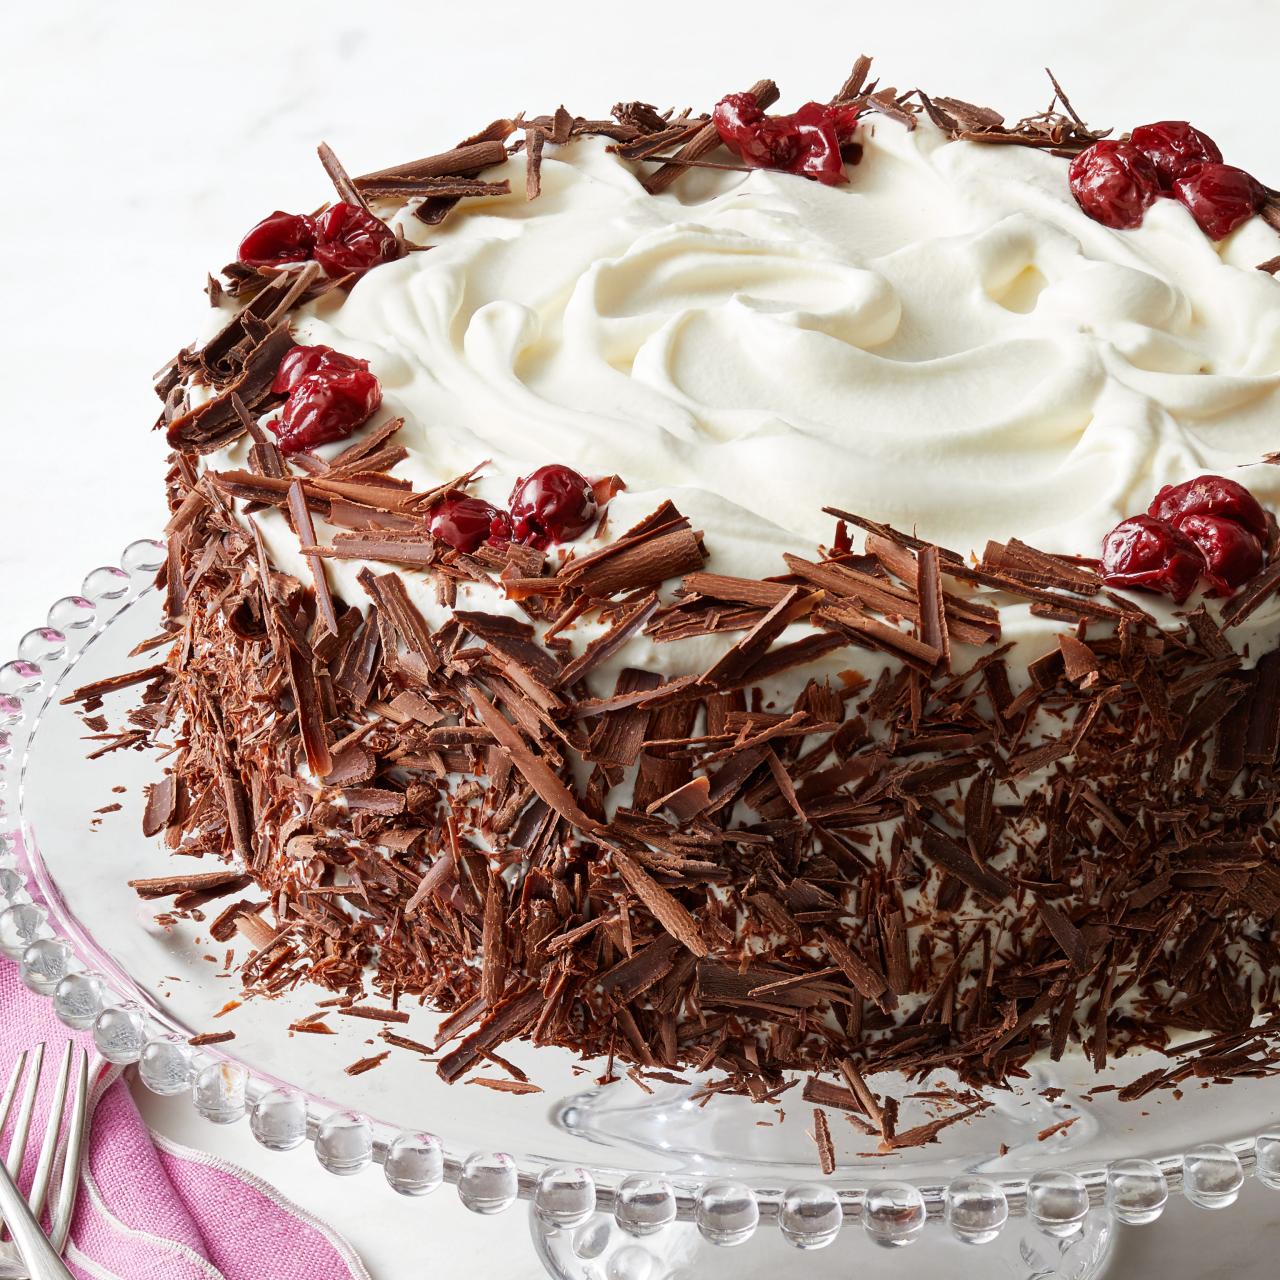 Blackforest Cake | The Love Of Cakes